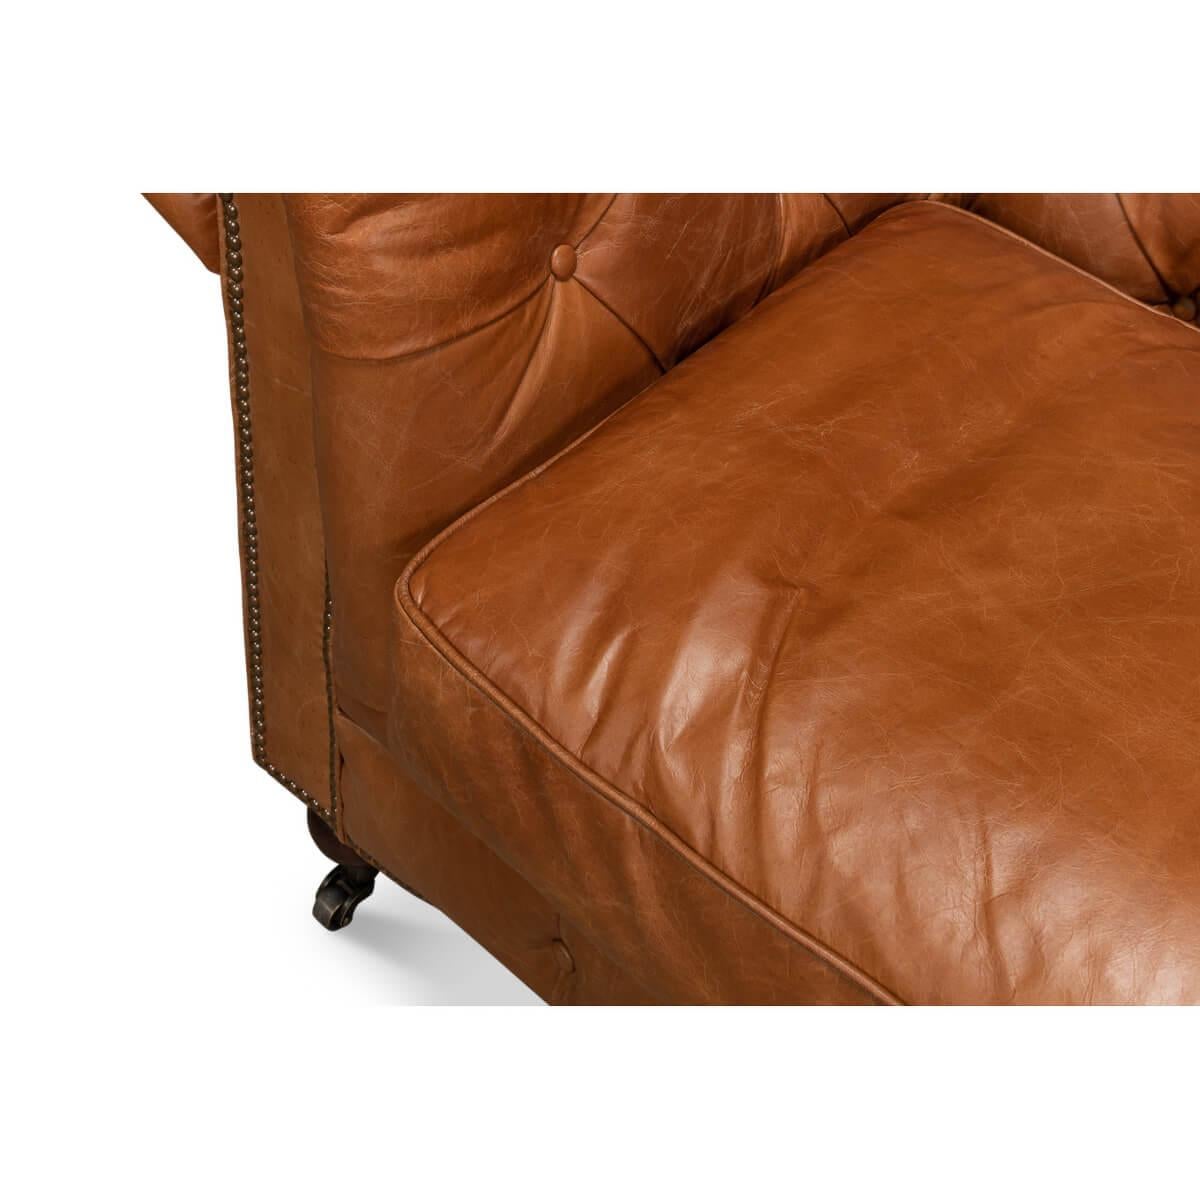 Vintage Style Classic Chesterfield Sofa - Vienna Brown Leather For Sale 1